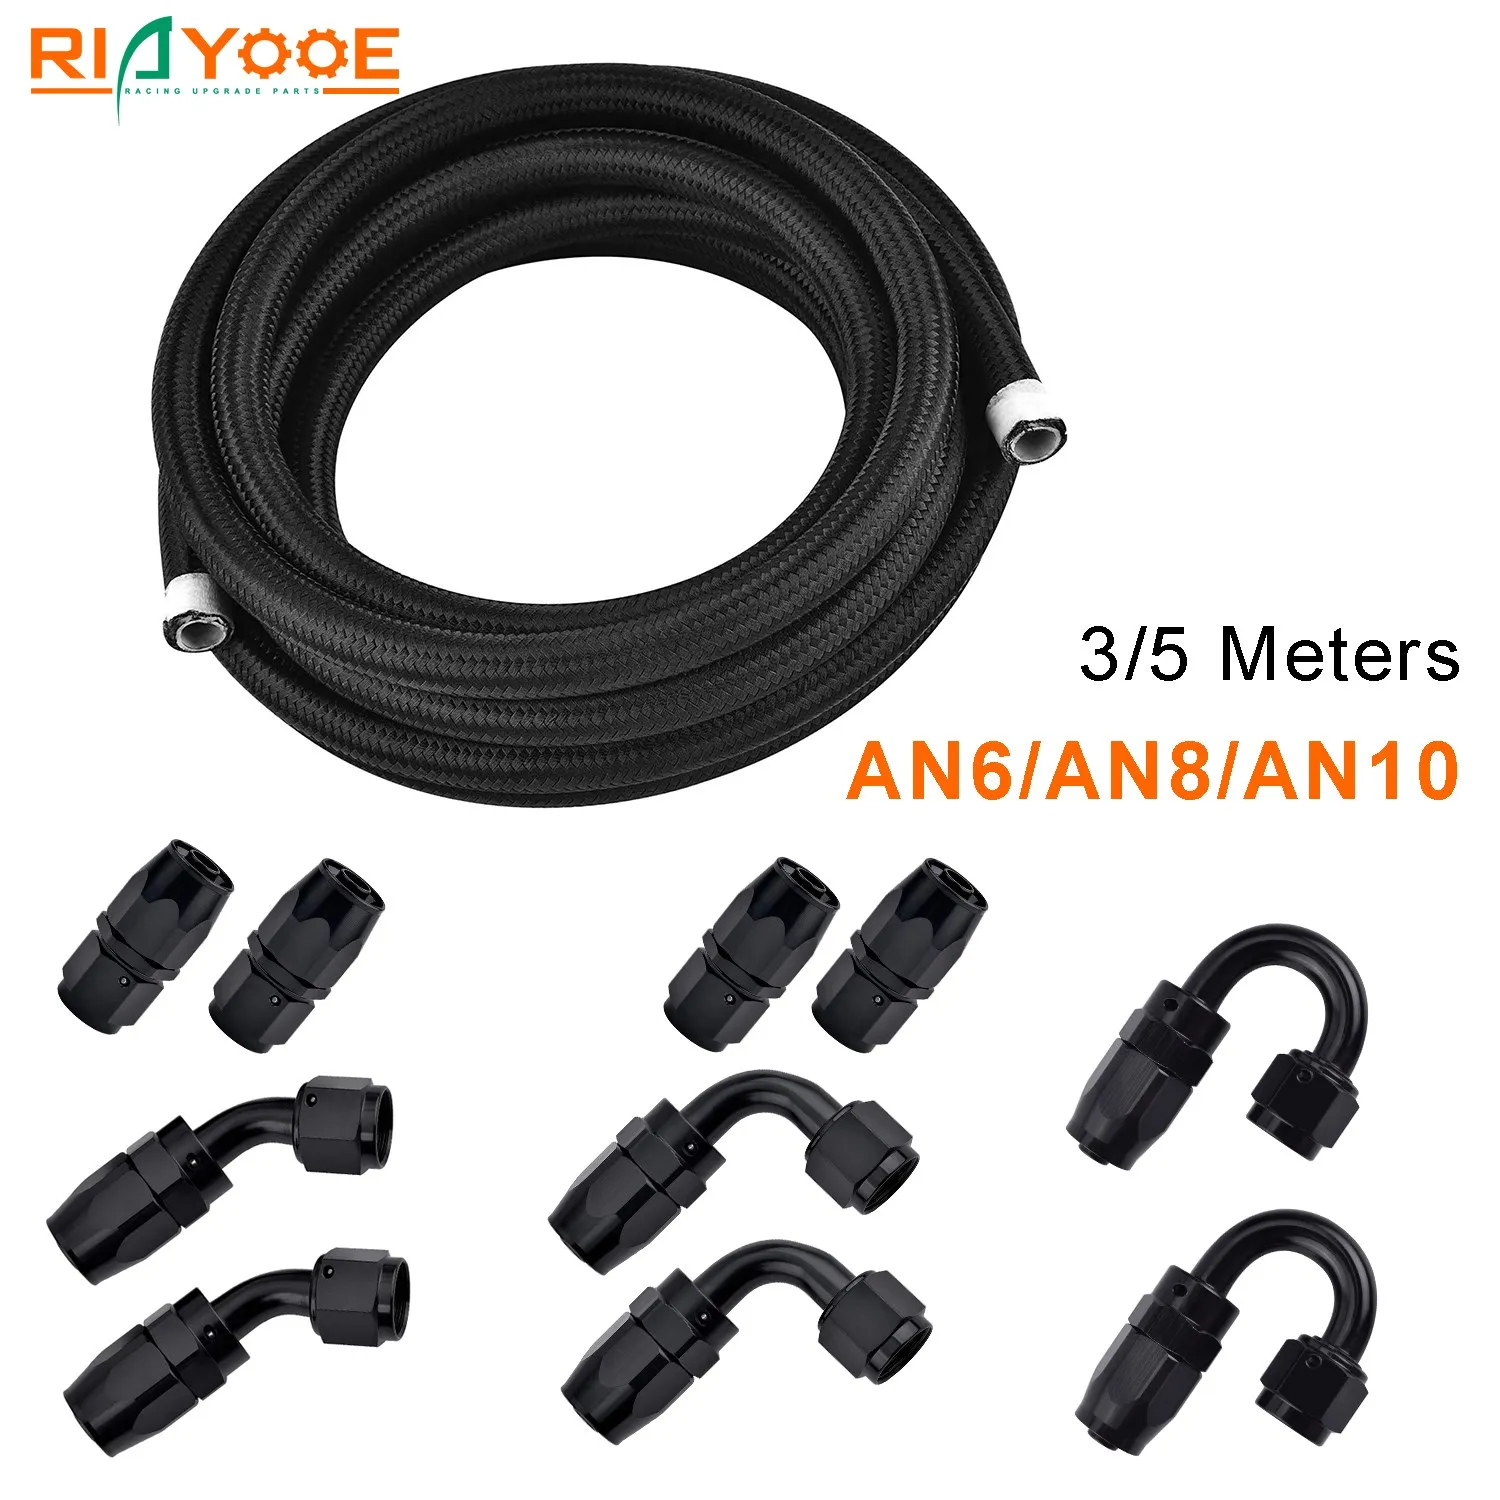 An6 An8 An10 Fuel Hoses Stainless Braided Nylon Cpe Oil Line Hose